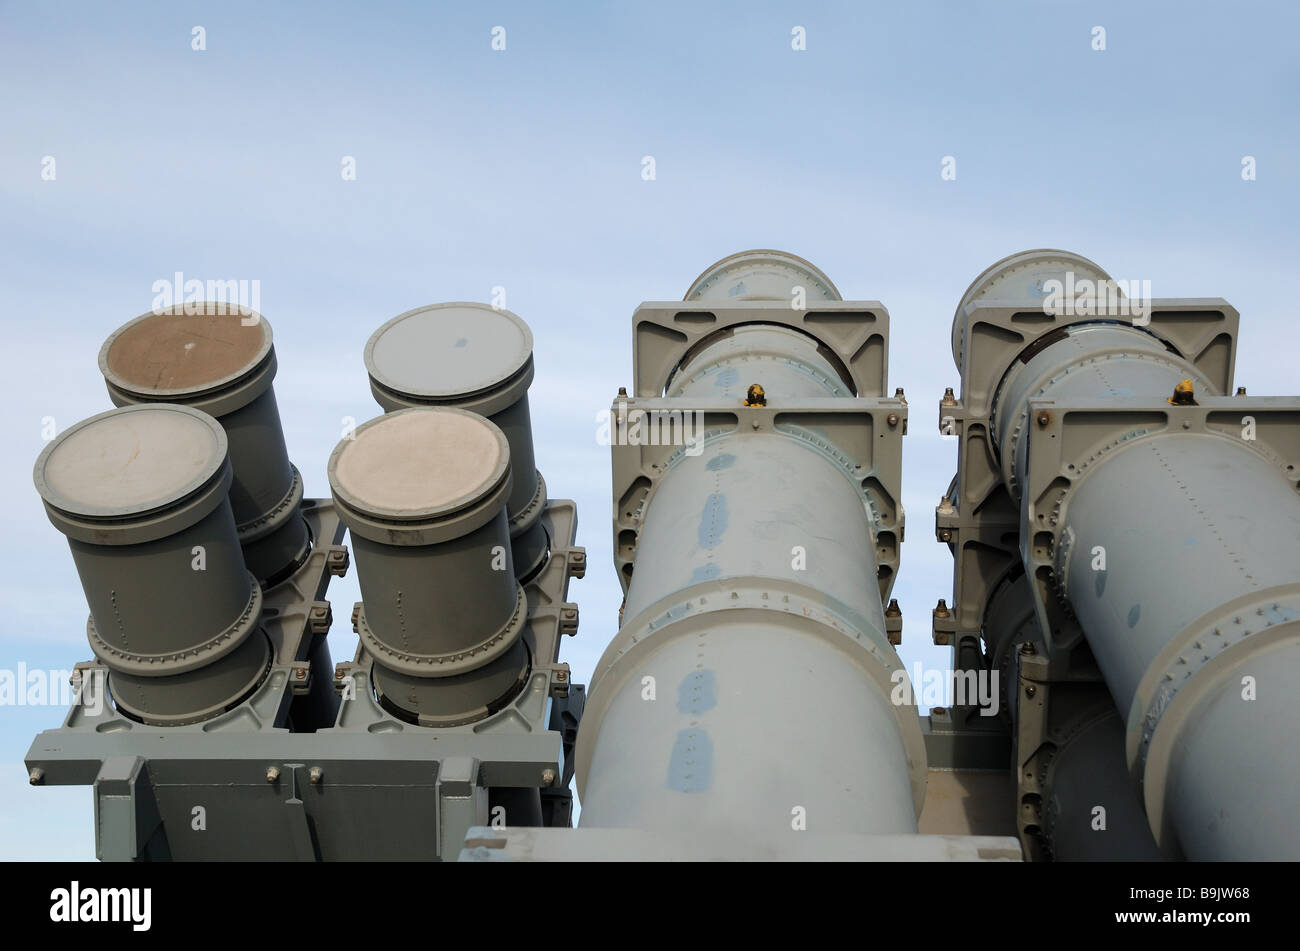 Main missile system on board a frigate Hessen Stock Photo